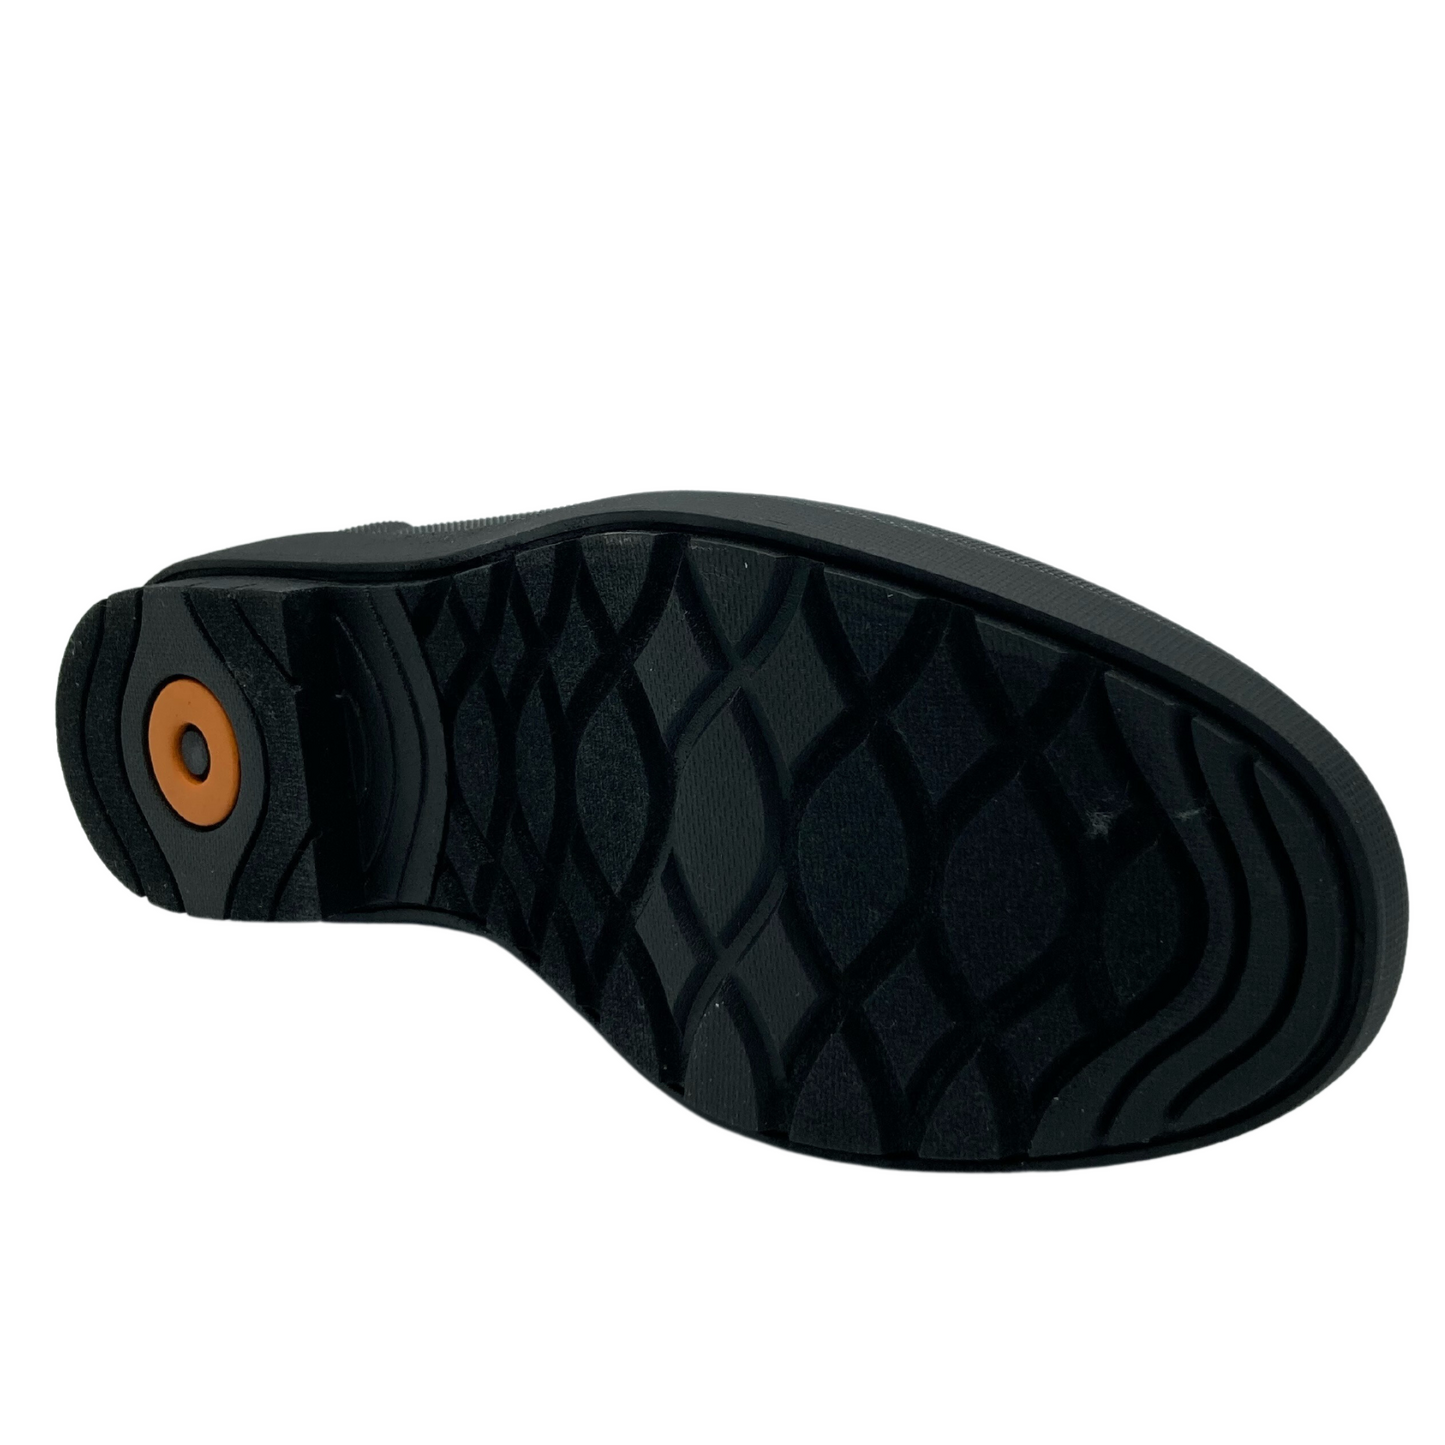 Bottom view of rain boot with black outsole